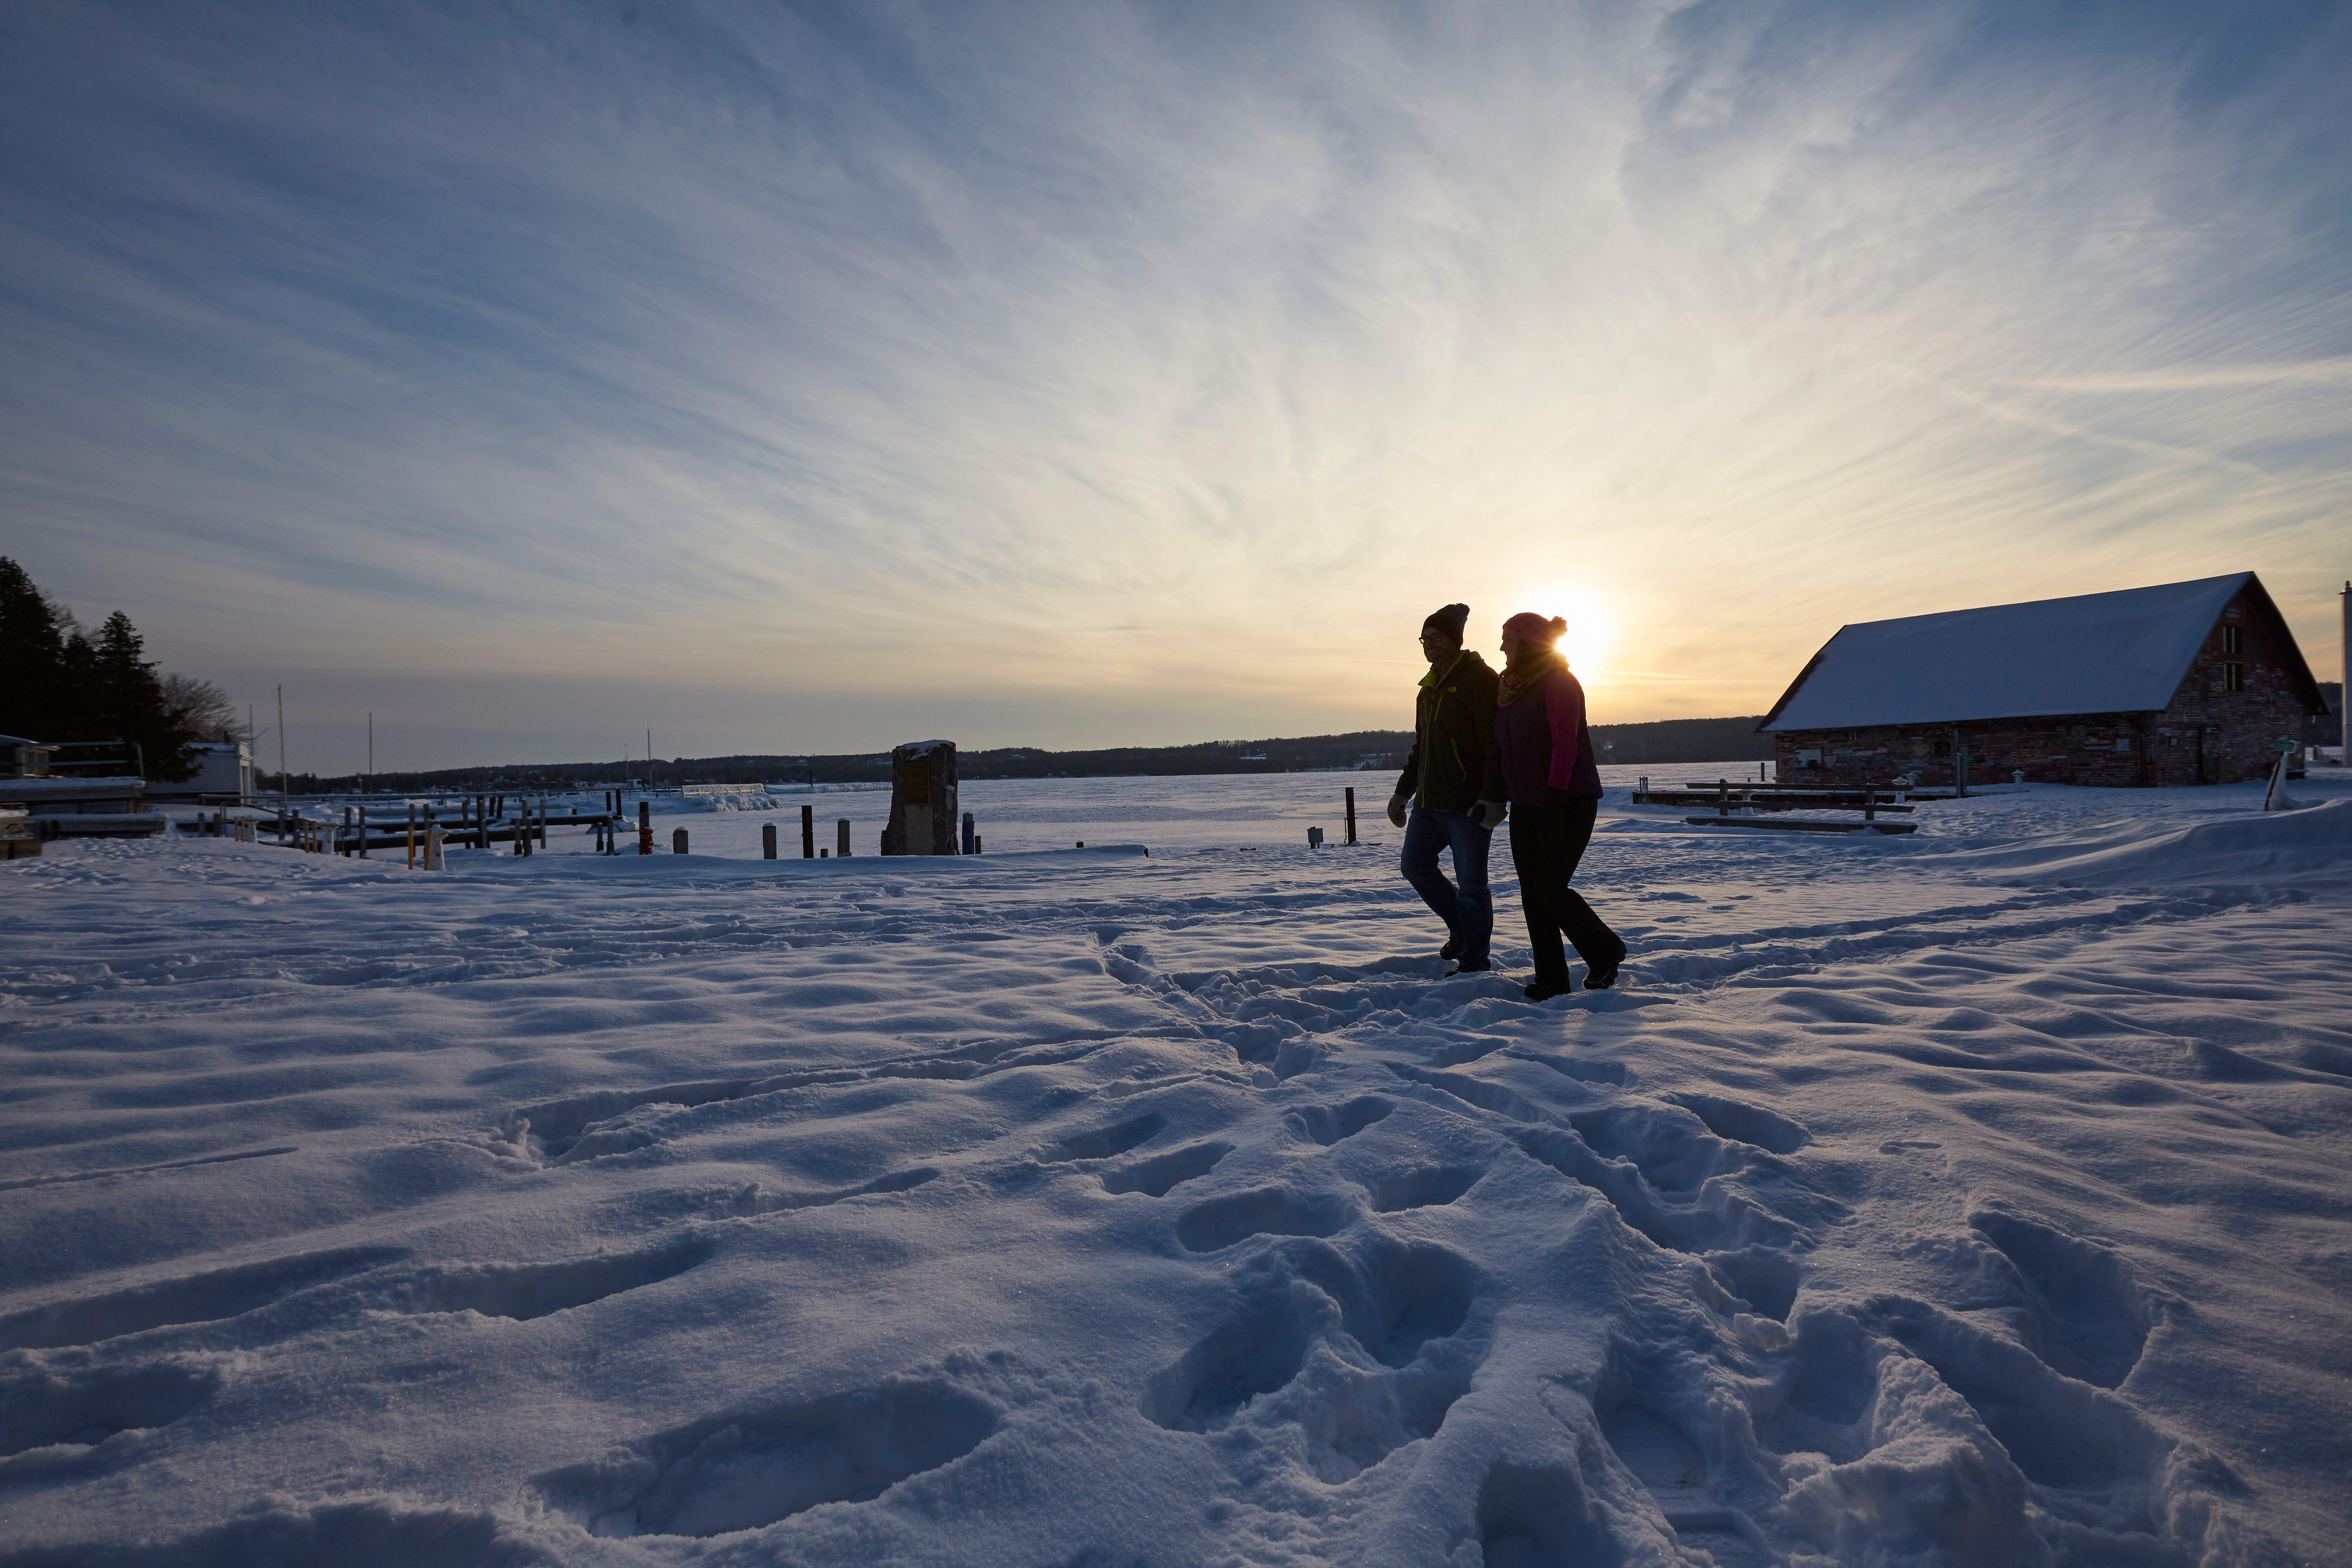 A couple enjoys a winter sunset hike at Anderson Dock in Ephraim, Door County.